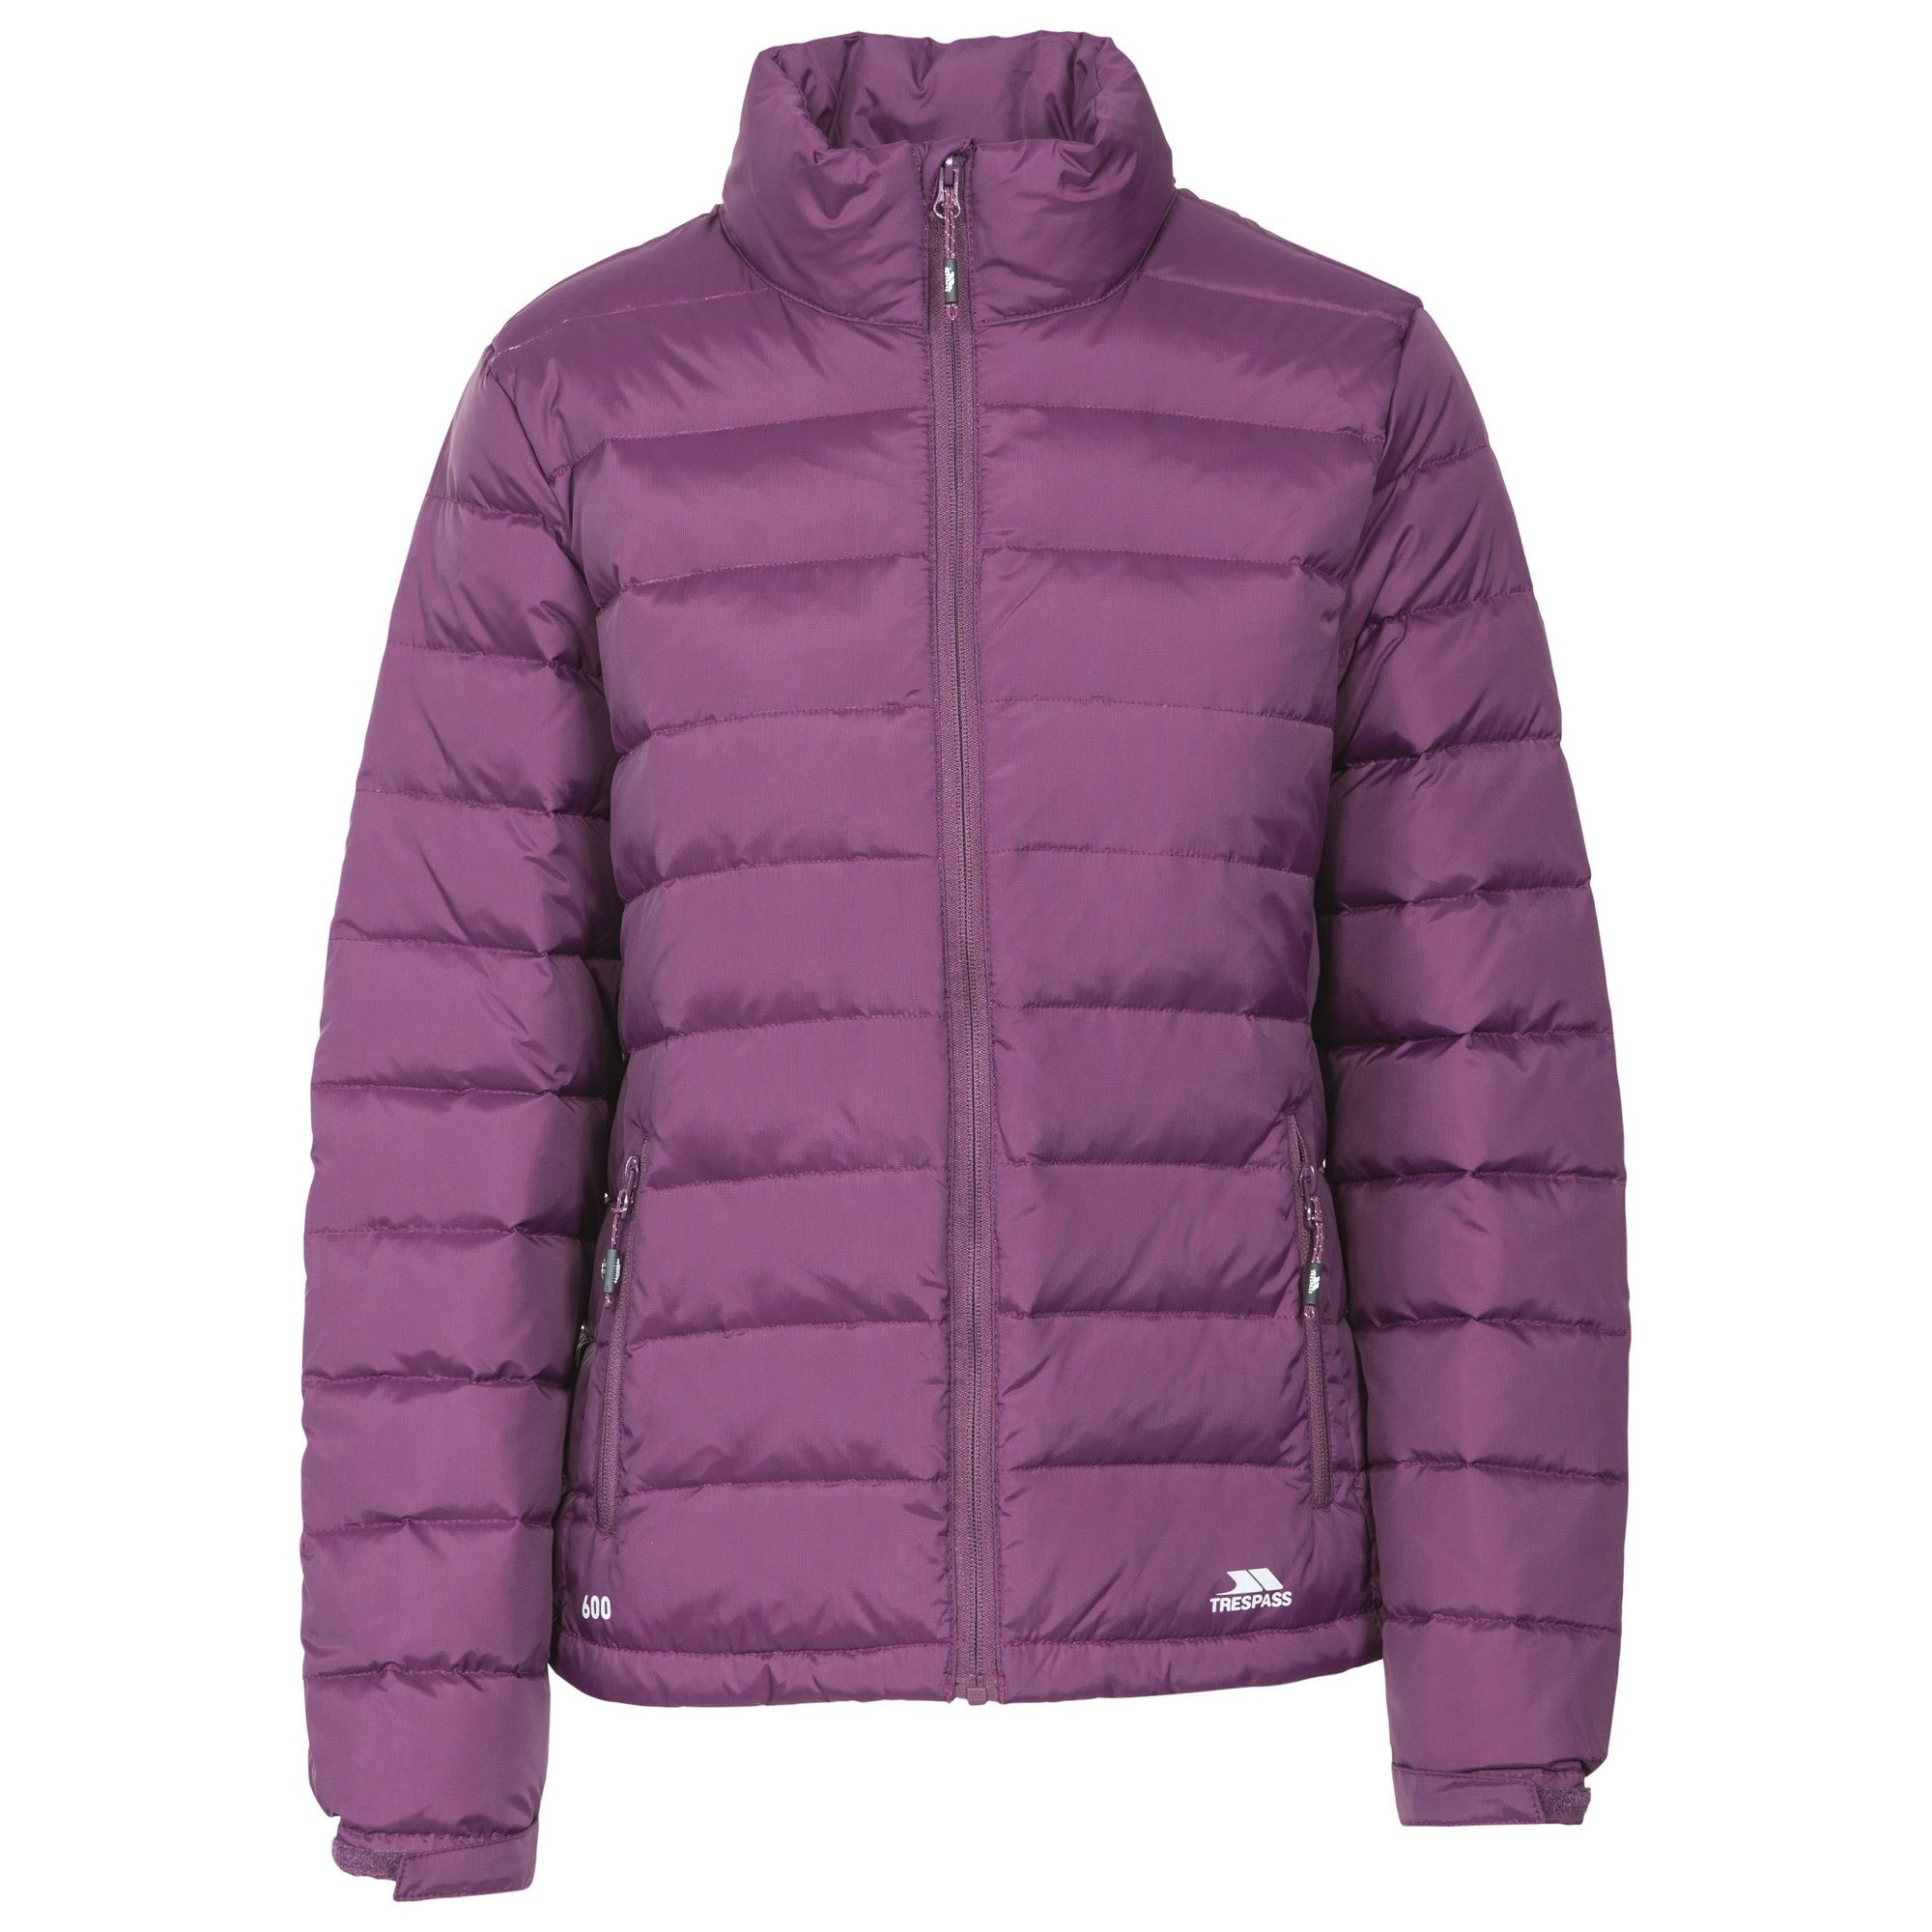 Womens down jacket. Down Powerfill 600. 2 lower zip pockets. Low profile front zip. Material composition: 80% Down/20% Feather, shell- 100% Polyamide, lining- 100% Polyamide, downproof lining. Trespass Womens Chest Sizing (approx): XS/8 - 32in/81cm, S/10 - 34in/86cm, M/12 - 36in/91.4cm, L/14 - 38in/96.5cm, XL/16 - 40in/101.5cm, XXL/18 - 42in/106.5cm.